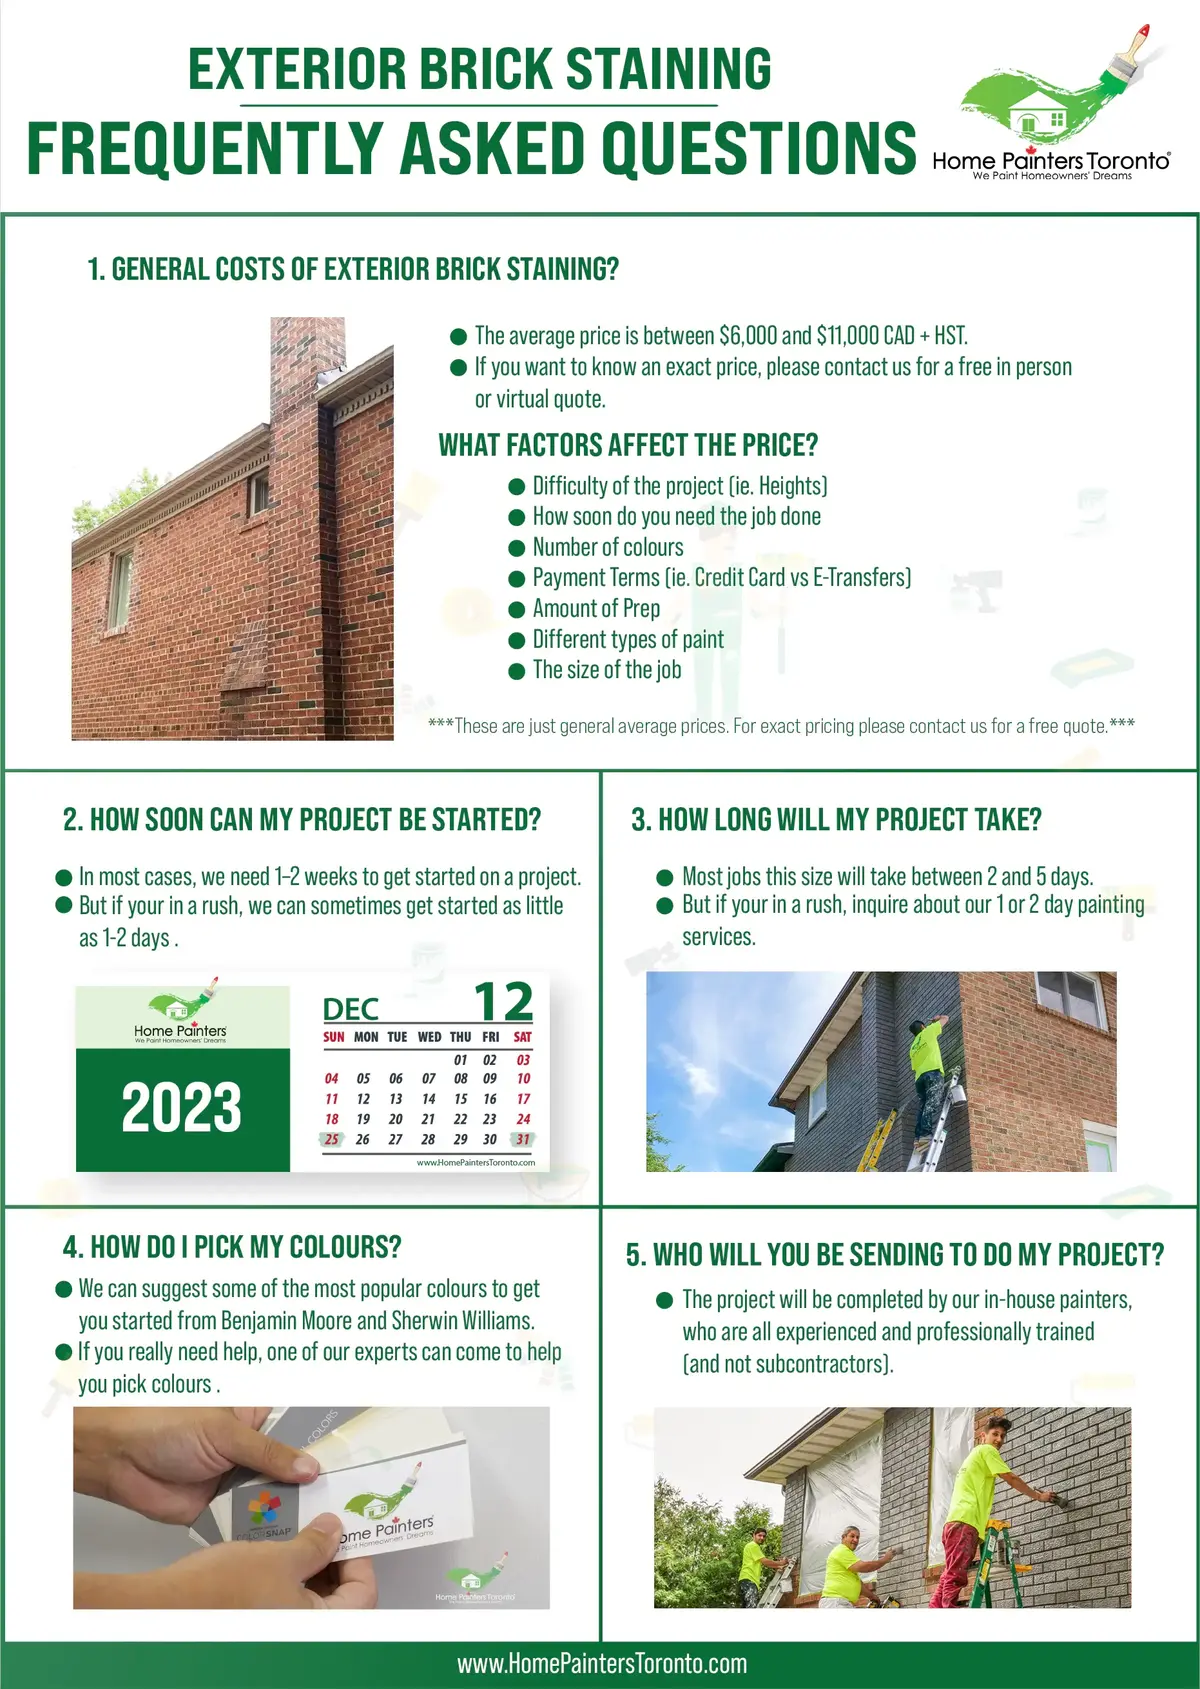 Infographic of frequently asked questions about exterior brick staining